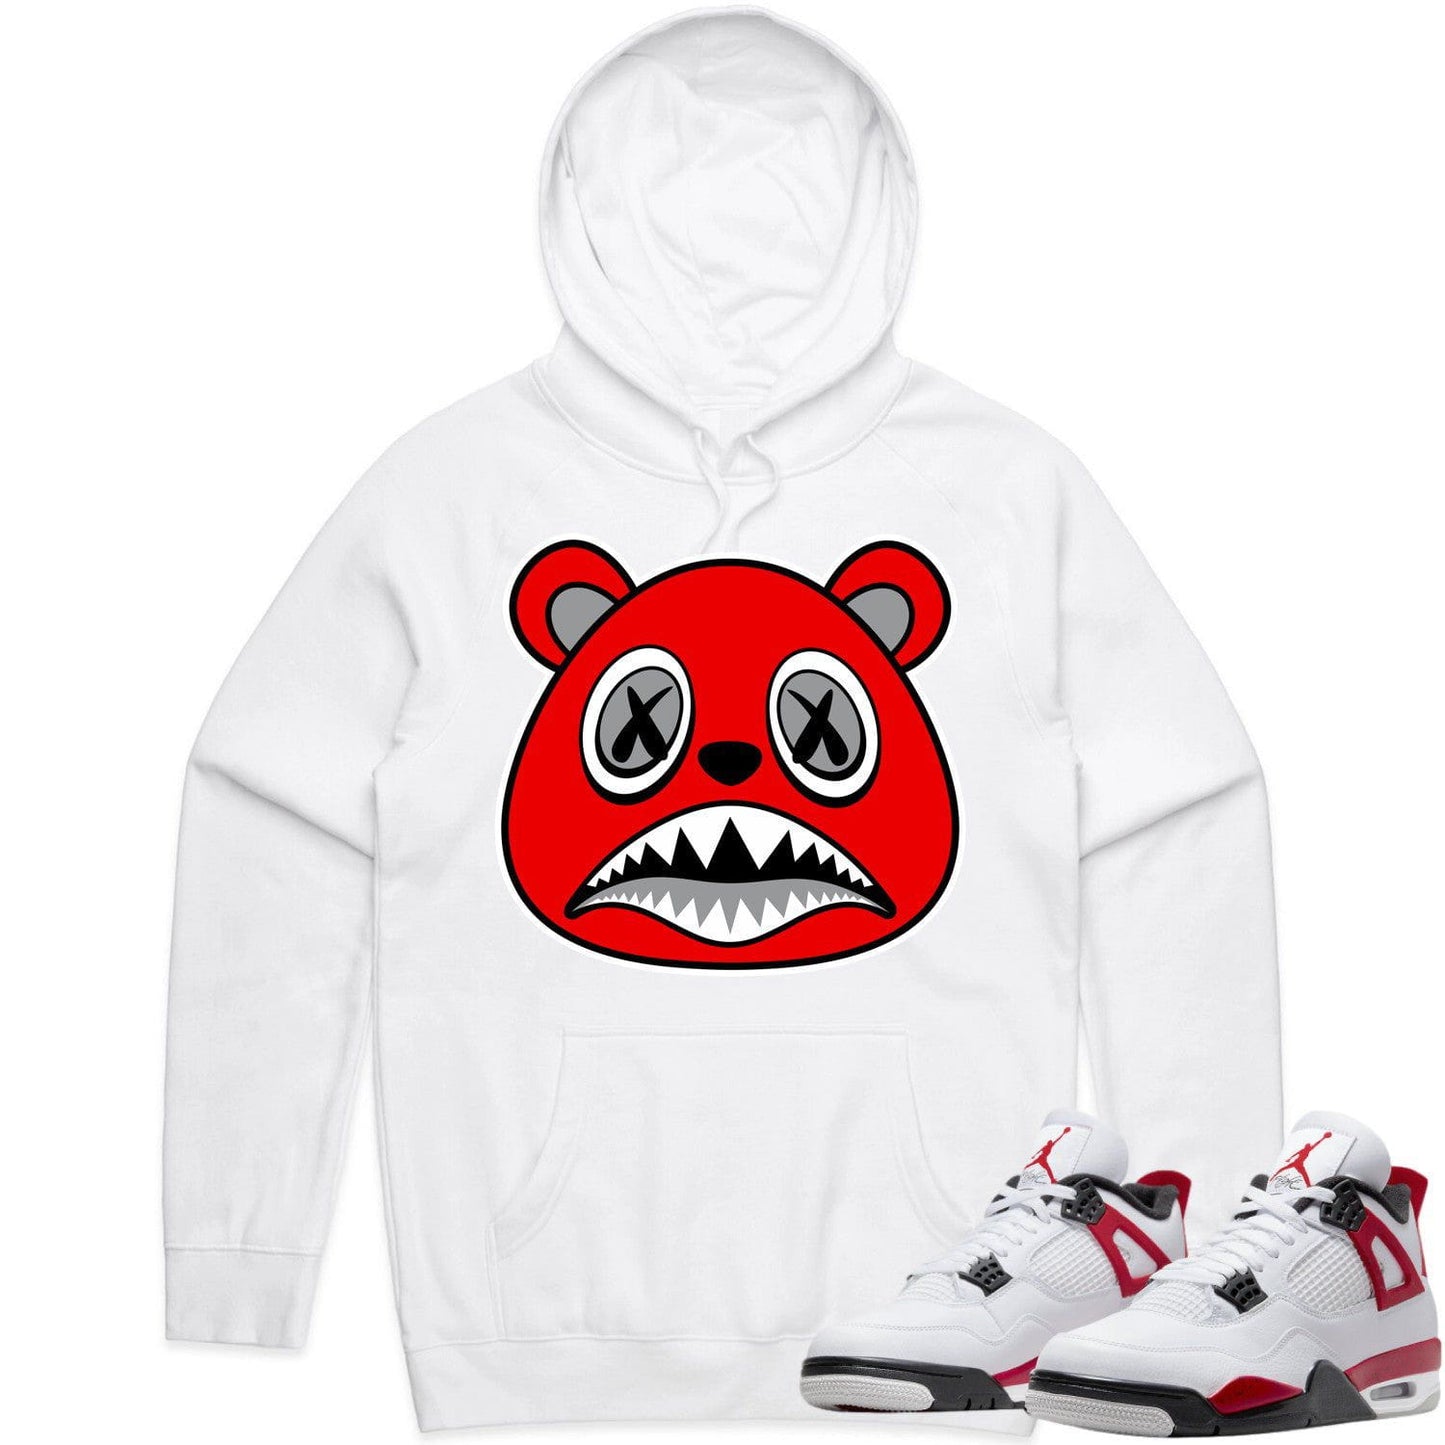 Red Cement 4s Hoodie - Jordan Retro 4 Red Cement Hoodie - Angry Baws